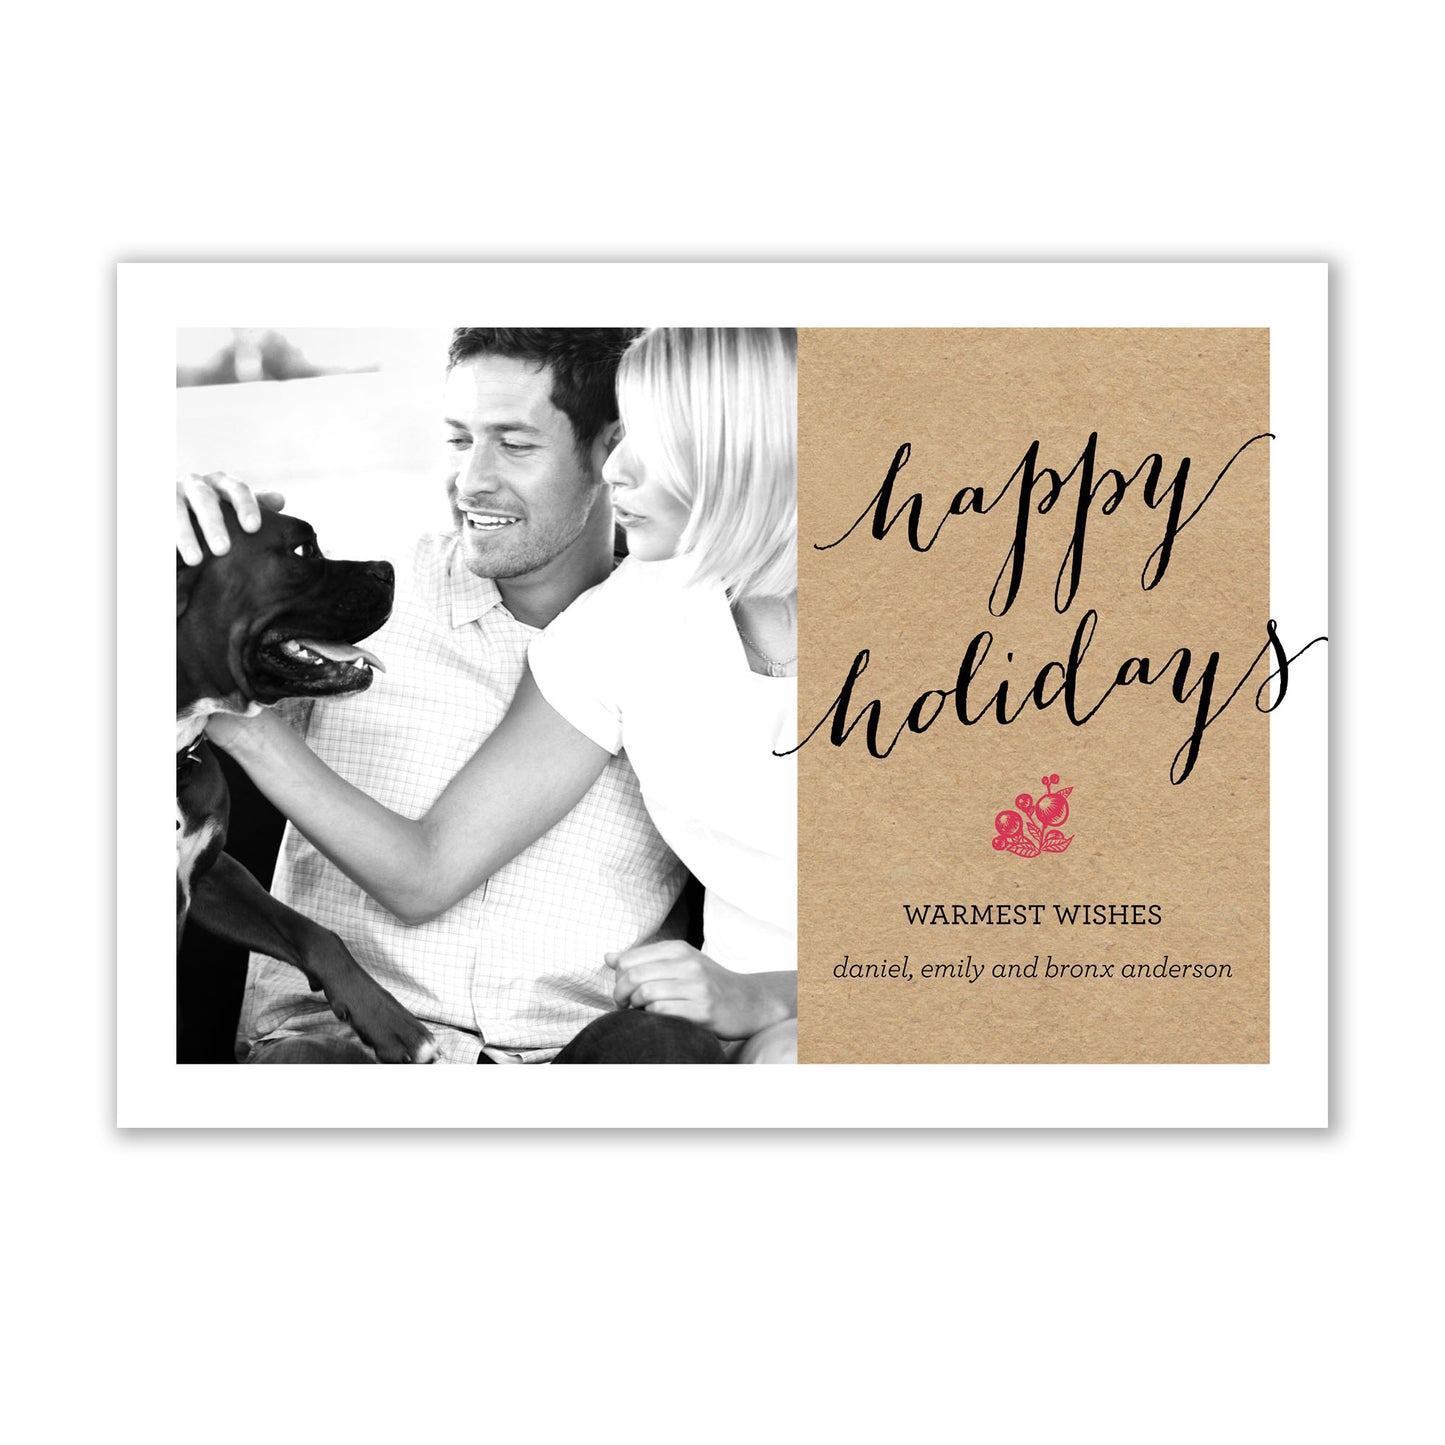 A couple with a dog on a Krafty Holiday Photo Card from Noteworthy, wishing everyone happy holidays.